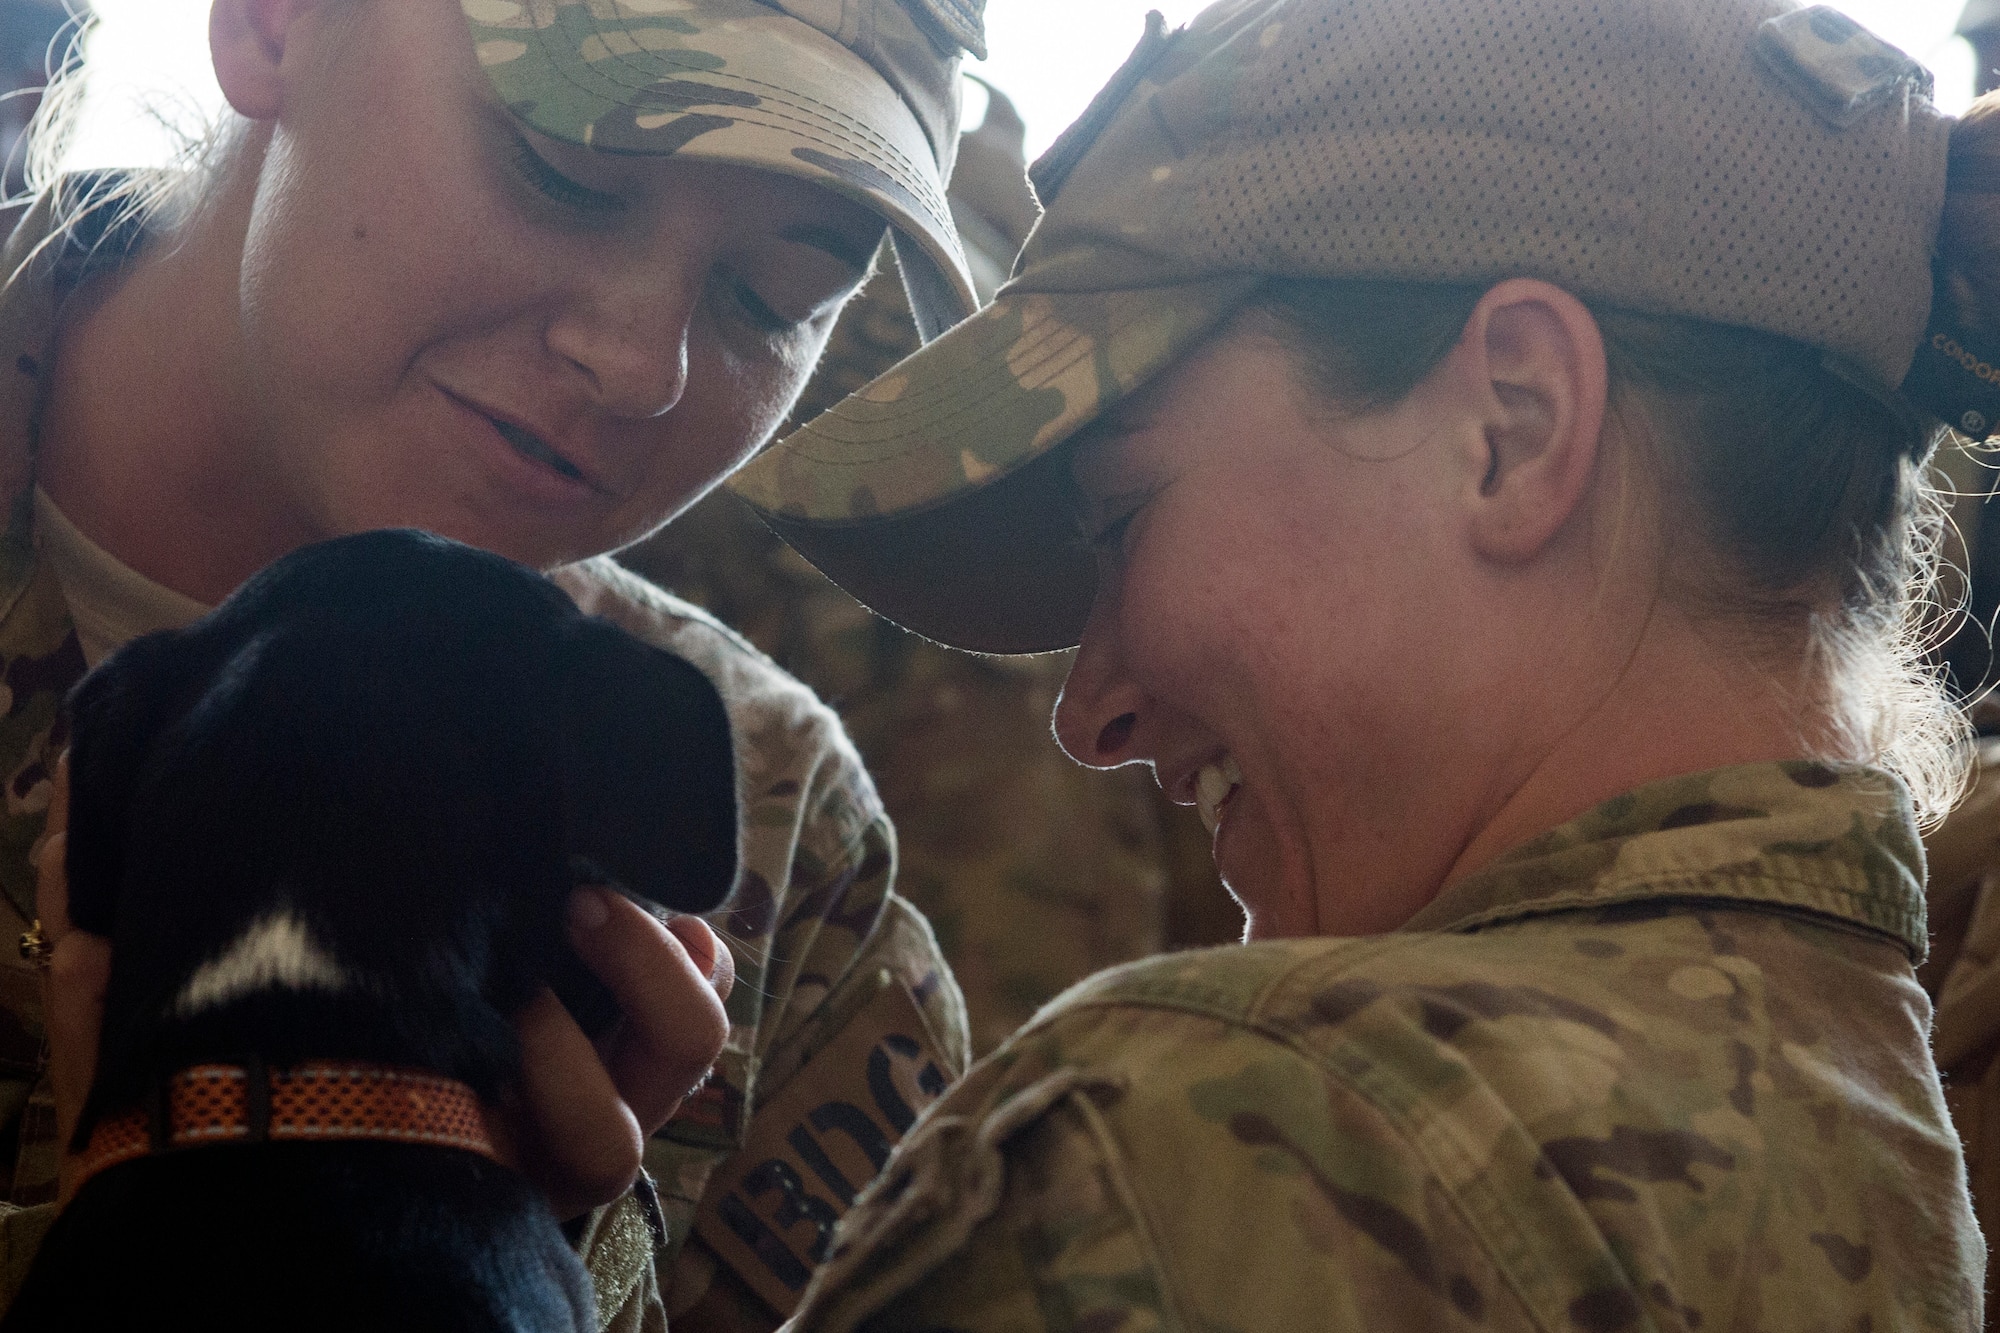 Airmen from the 823d Base Defense Squadron (BDS) greet a puppy during a redeployment, Oct. 26, 2017, at Moody Air Force Base, Ga. The 822d, 823d and 824th BDS’s provide high-risk force protection and integrated base defense for expeditionary air forces. Airmen from the 823d BDS just returned home from conducting relief-in-place in the United States Africa Command theater while Airmen from the 824th BDS took their place. (U.S. Air Force photo by Senior Airman Janiqua P. Robinson)